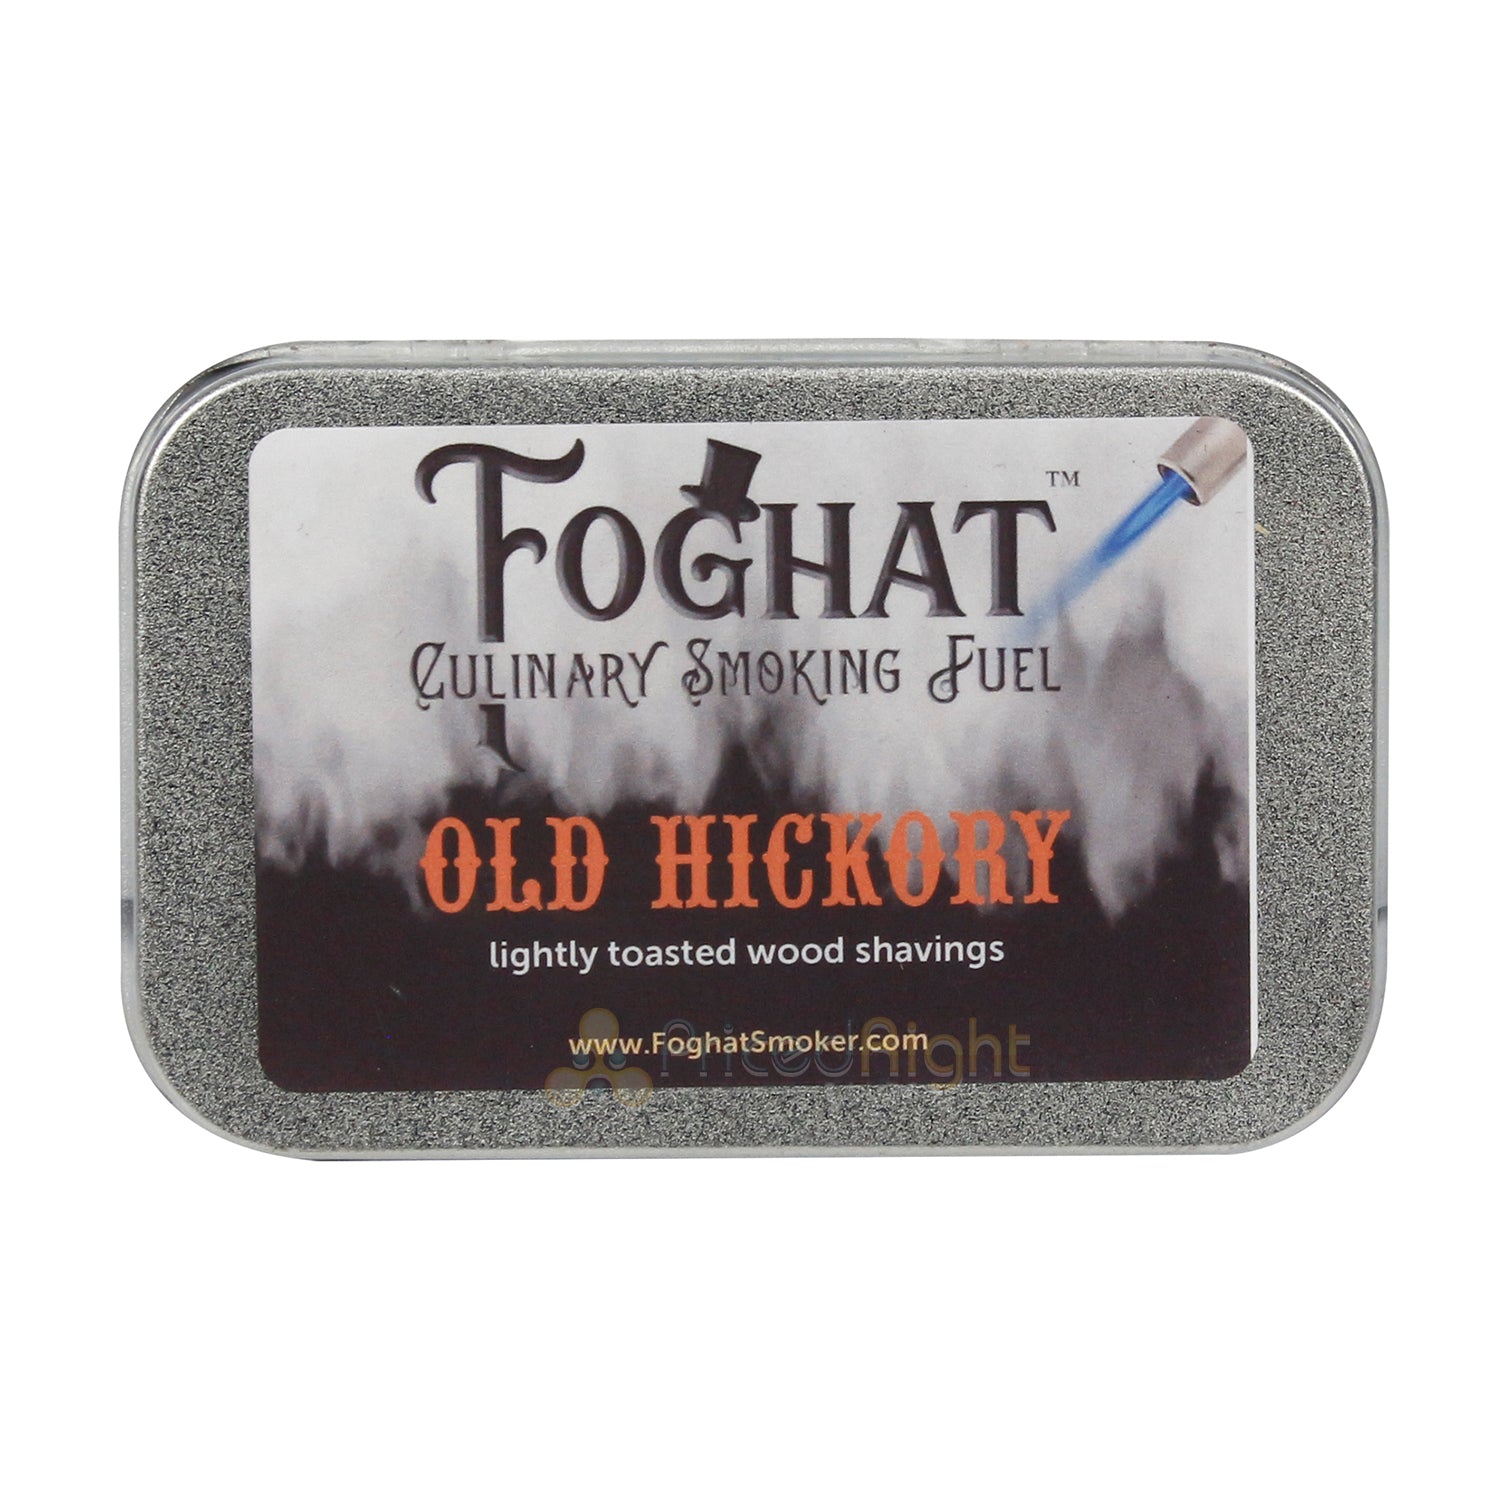 Foghat Culinary Smoking Fuel Old Hickory Sweet & Strong All-Natural 4 Ounce